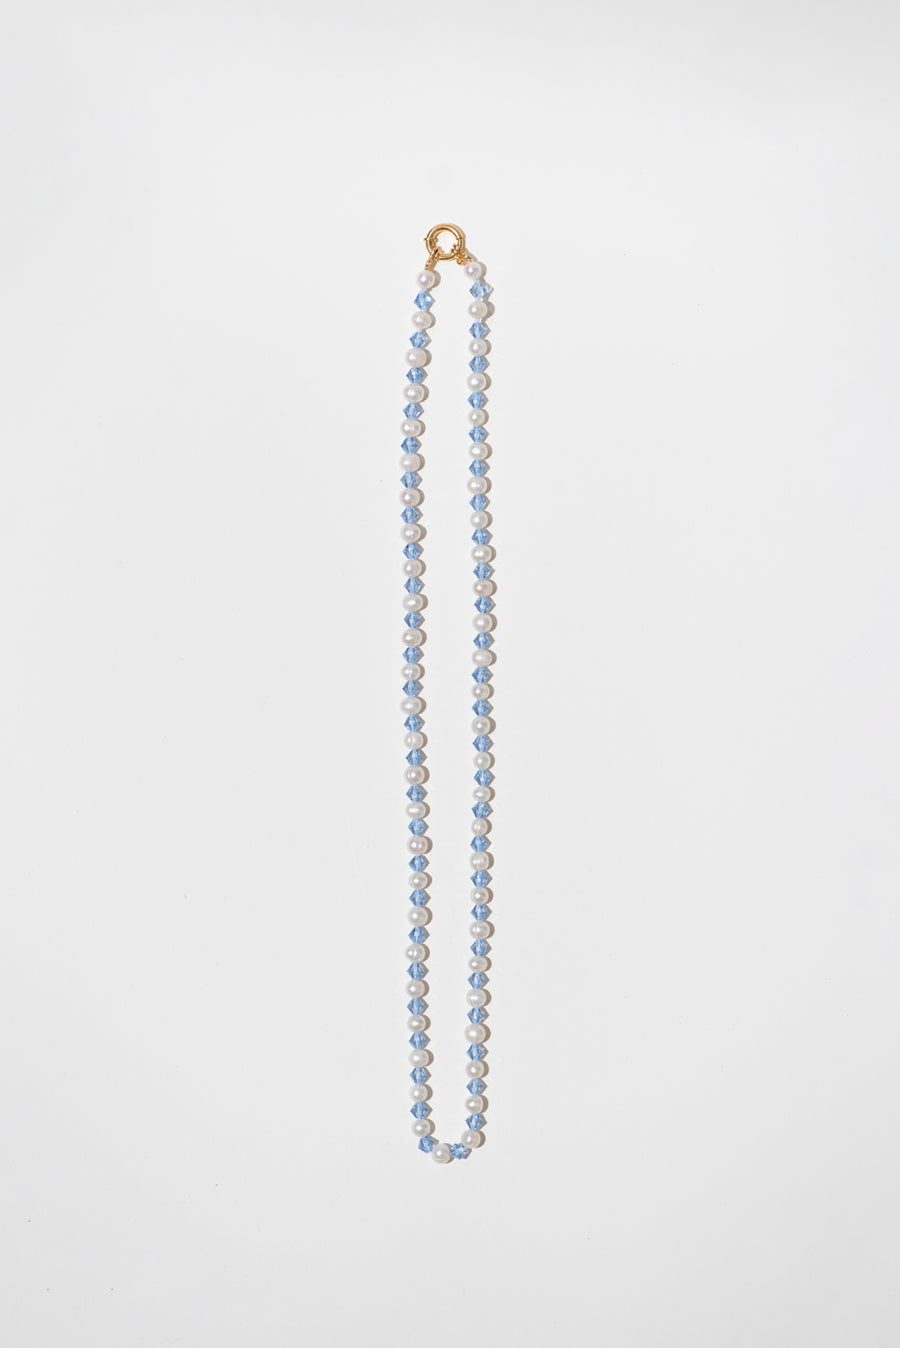 The Ocean Pearl Necklace - Long